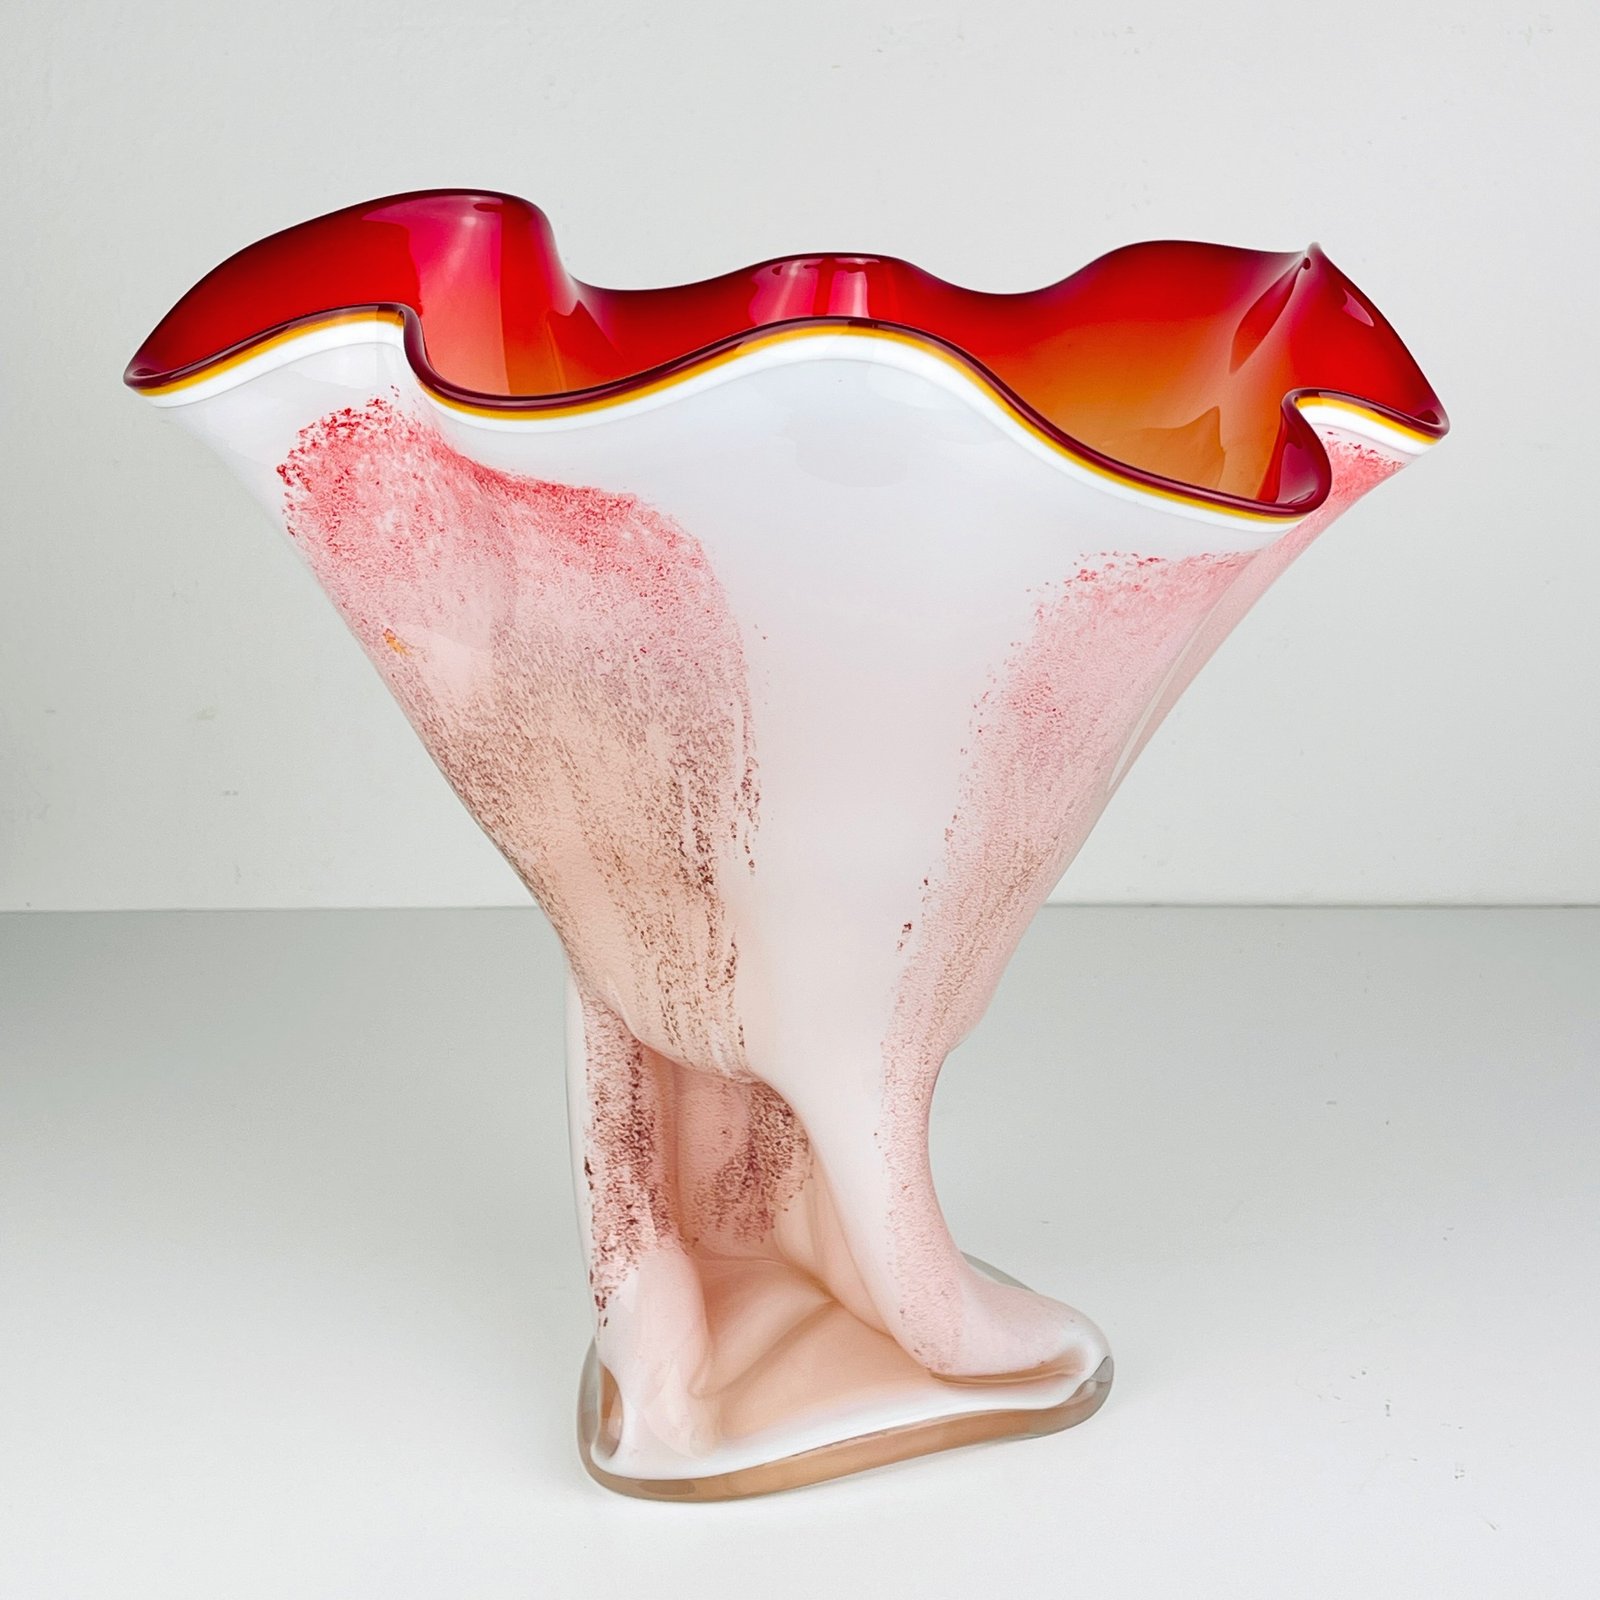 Vintage murano vase Red and White Italy 1970s / Made in Murano / Retro home decor